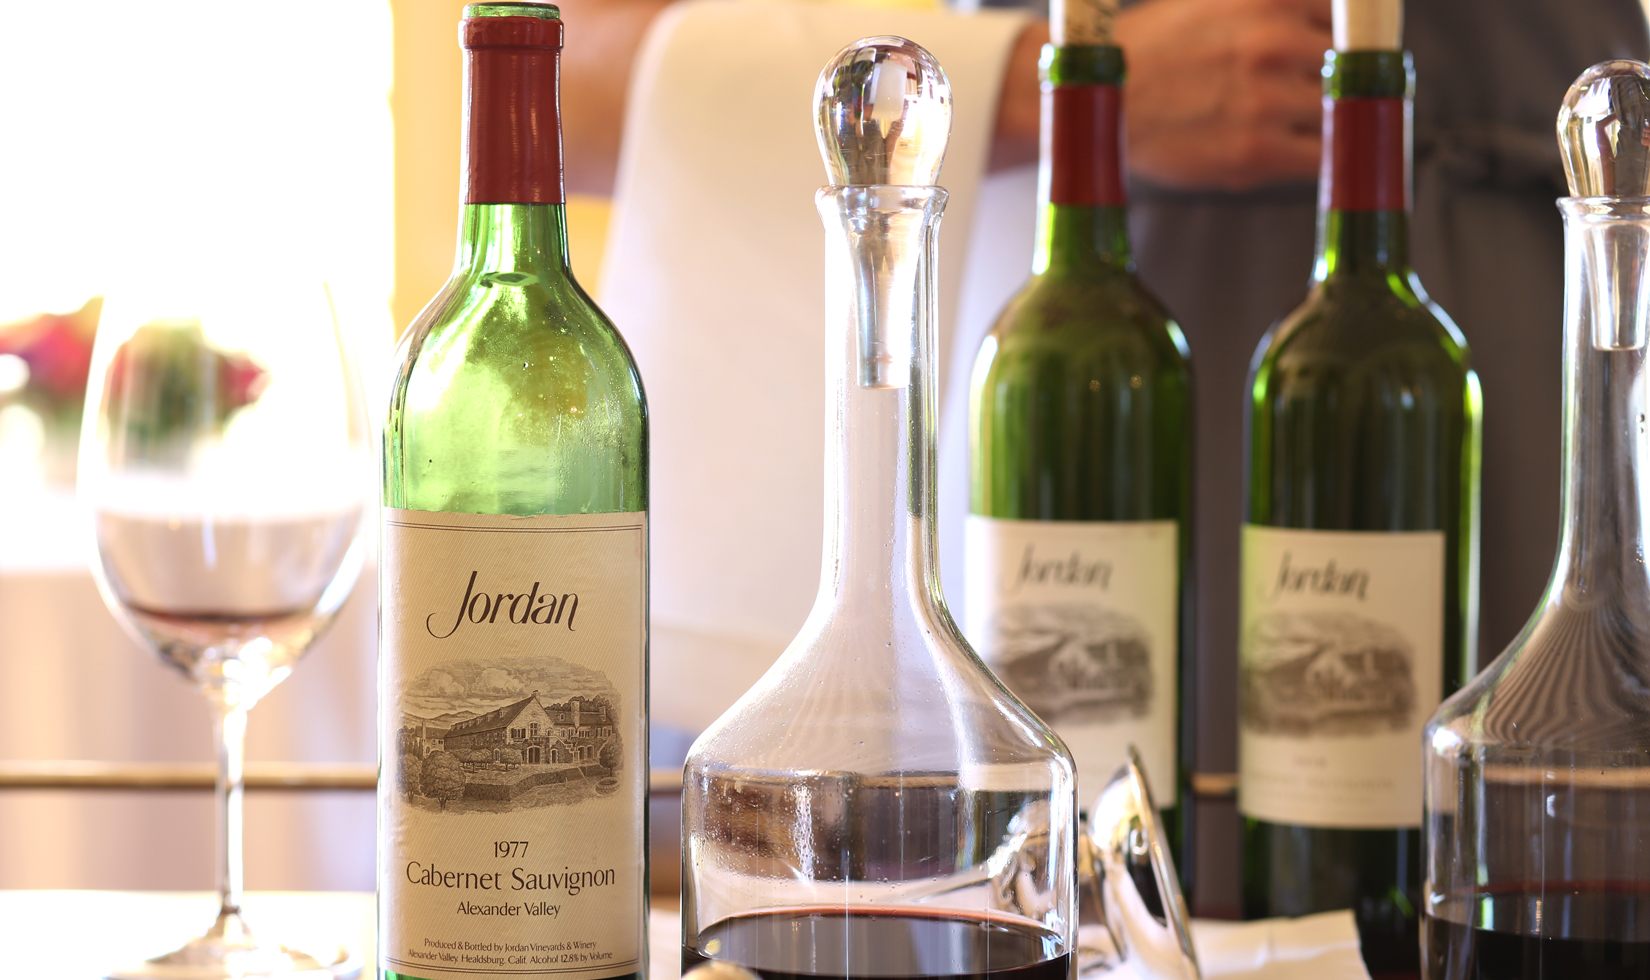 3 Jordan Cabernet Sauvignon Wines with wine glass in the table as featured in Wine Country Table